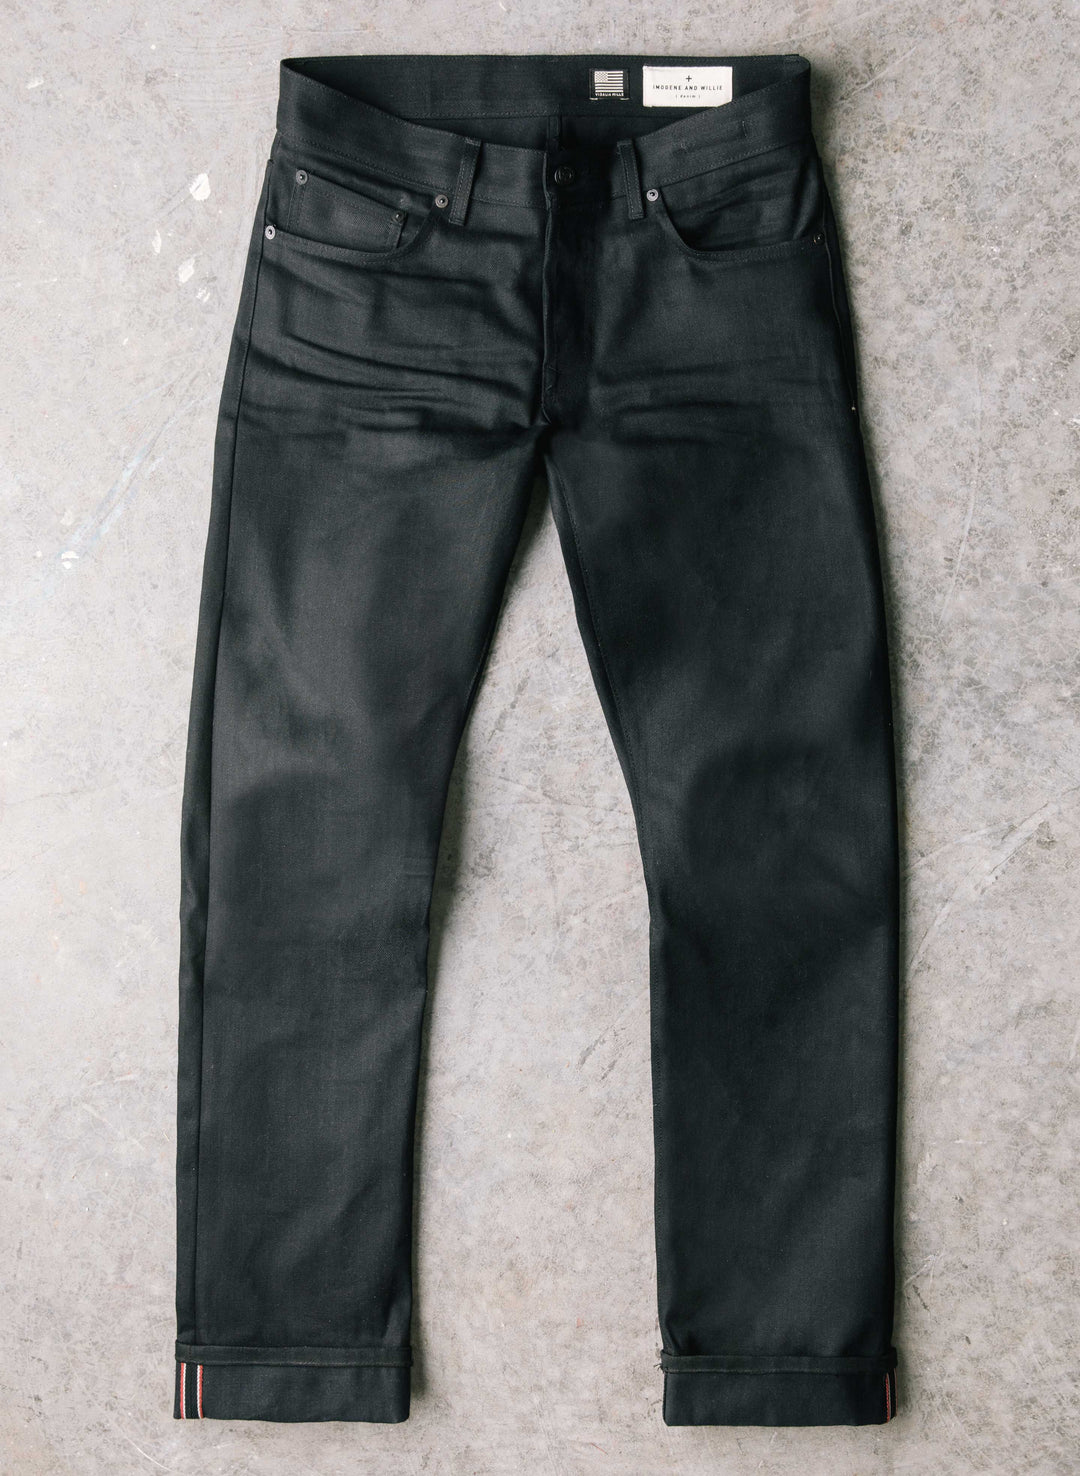 a pair of black jeans